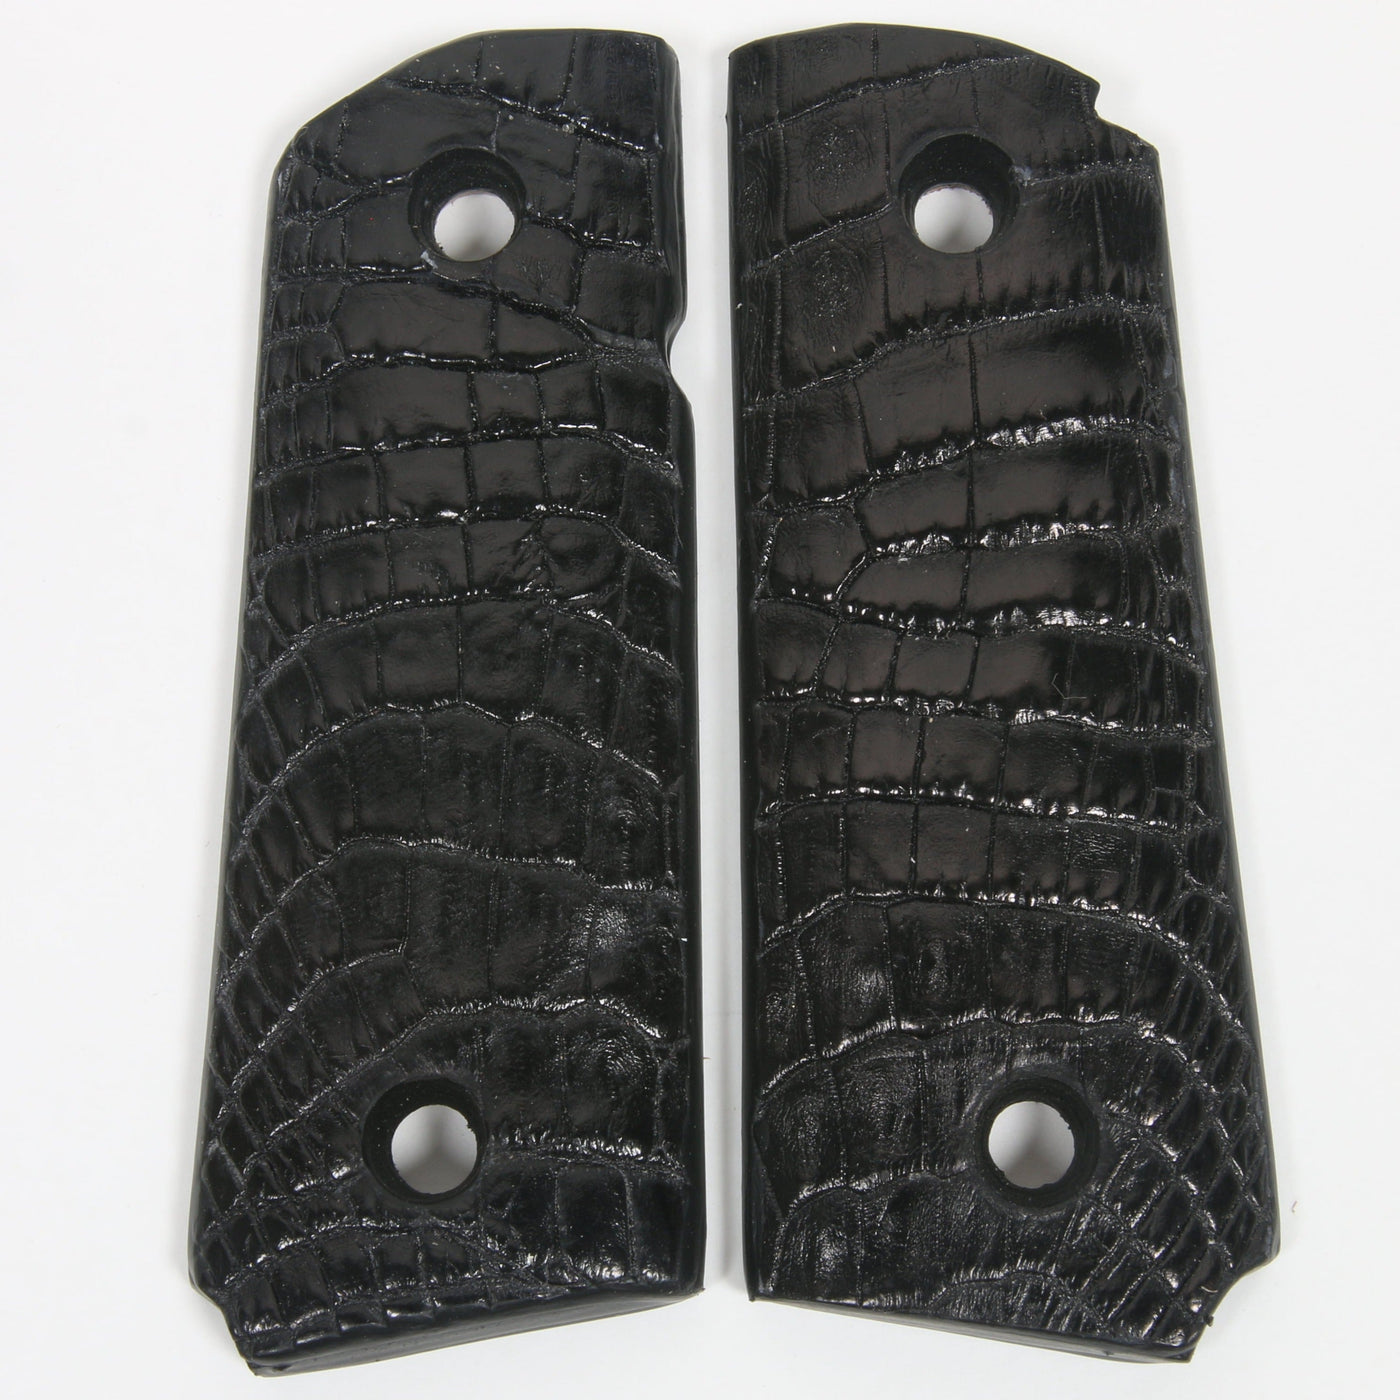 Alligator Skin Compact Size 1911 Grips